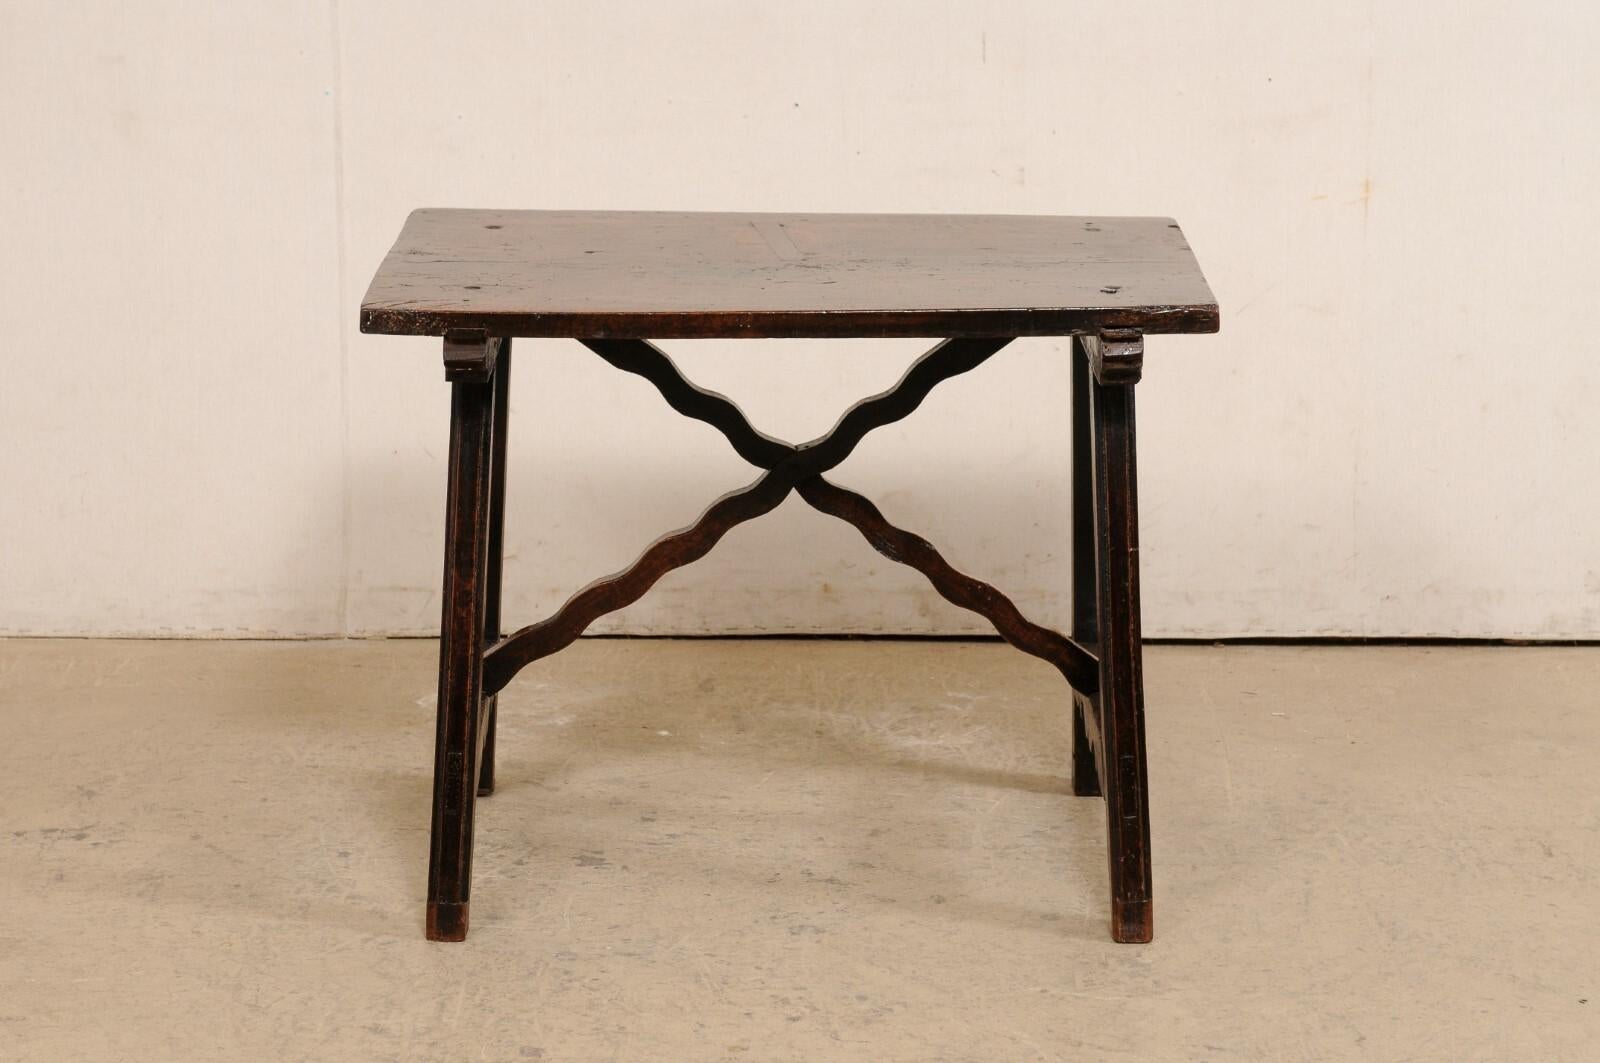 18th C. Spanish Table with a Wavy X-Stretcher at Underside For Sale 4